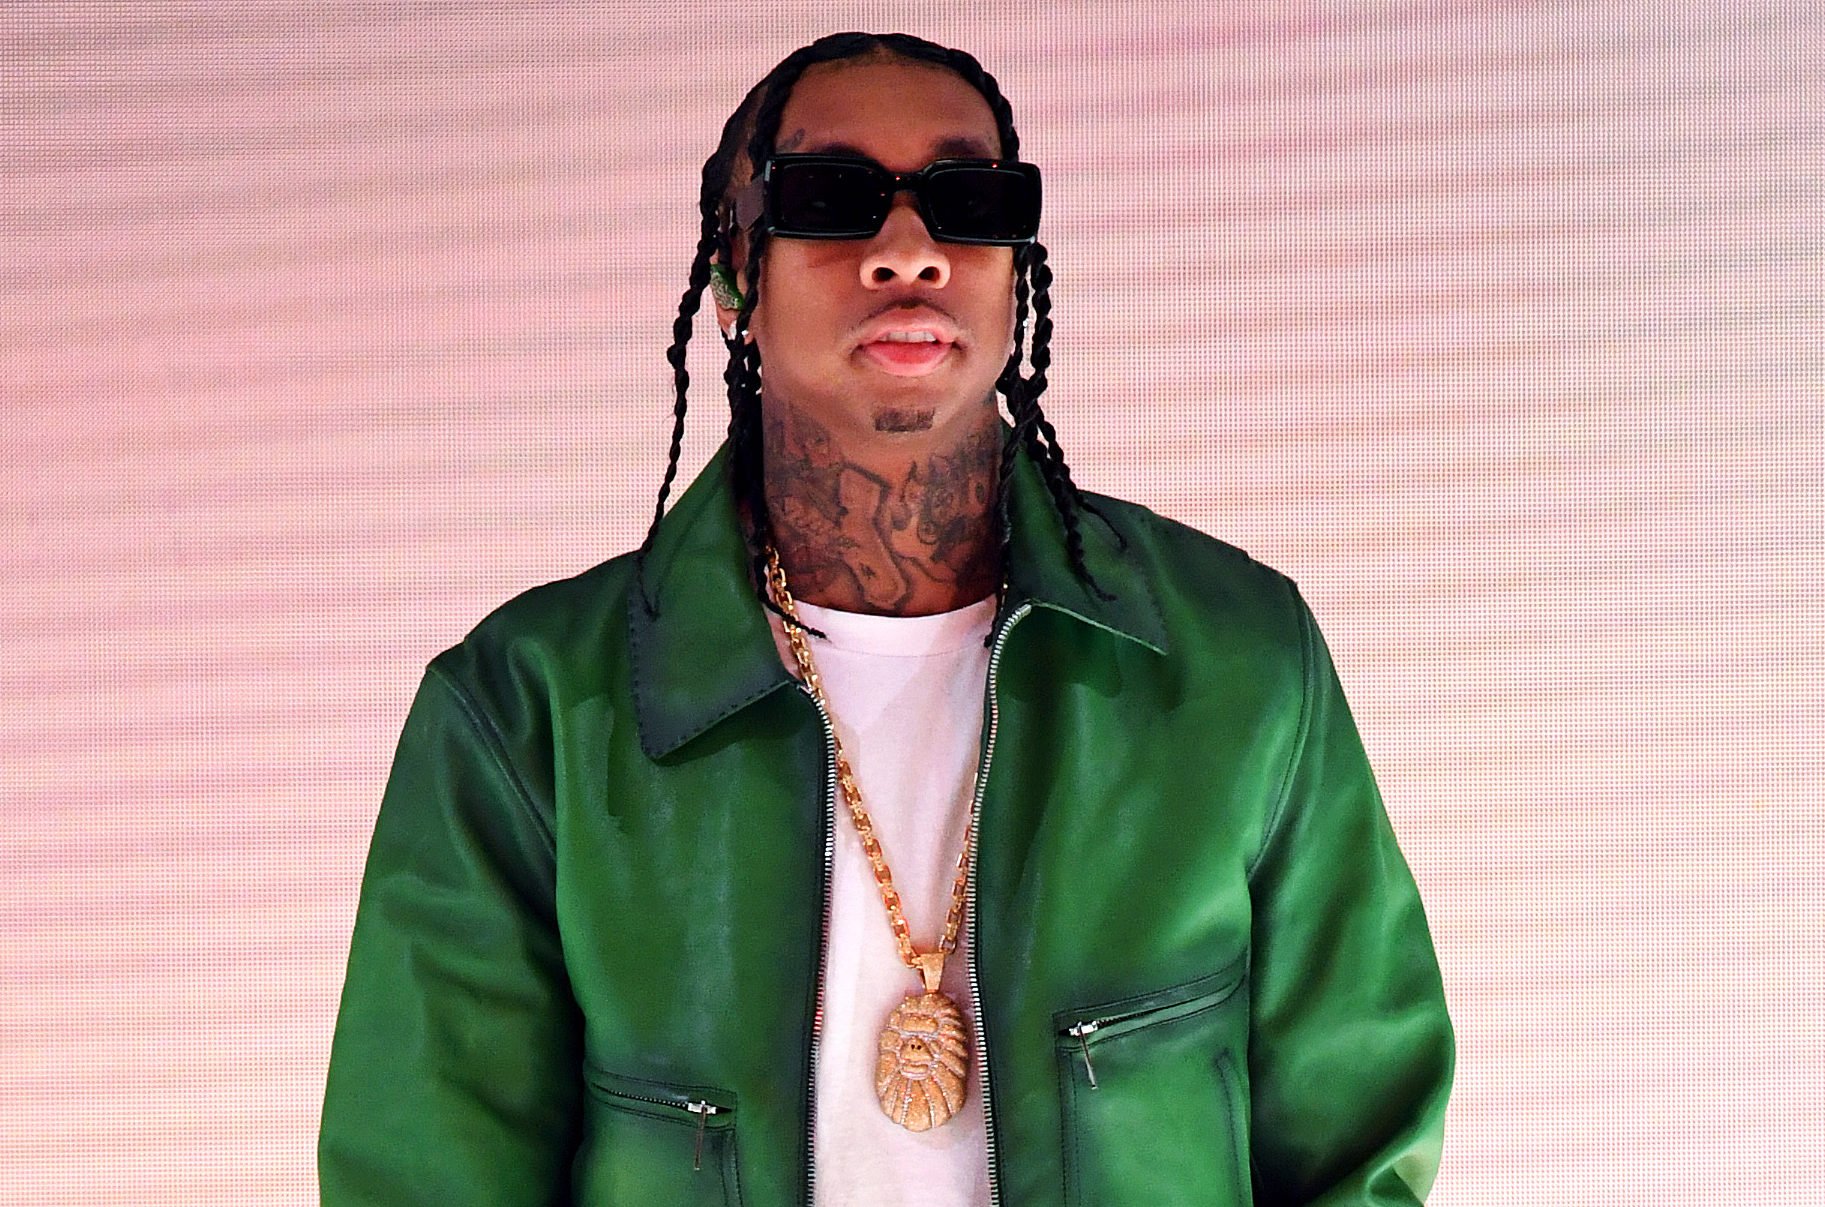 Social Media Reacts To Tyga's Nudes As He Promotes His OnlyFans Account